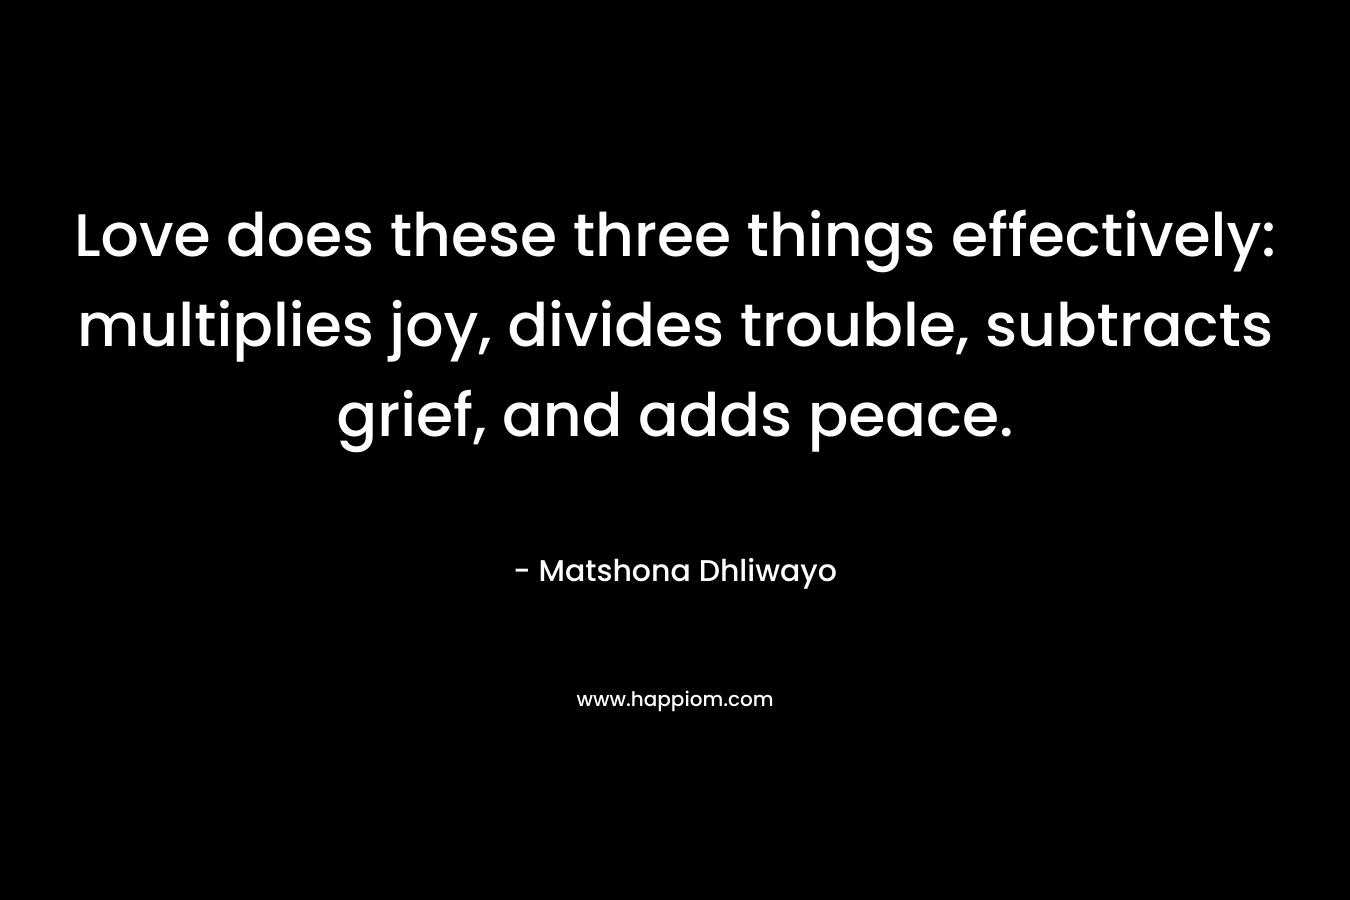 Love does these three things effectively: multiplies joy, divides trouble, subtracts grief, and adds peace.